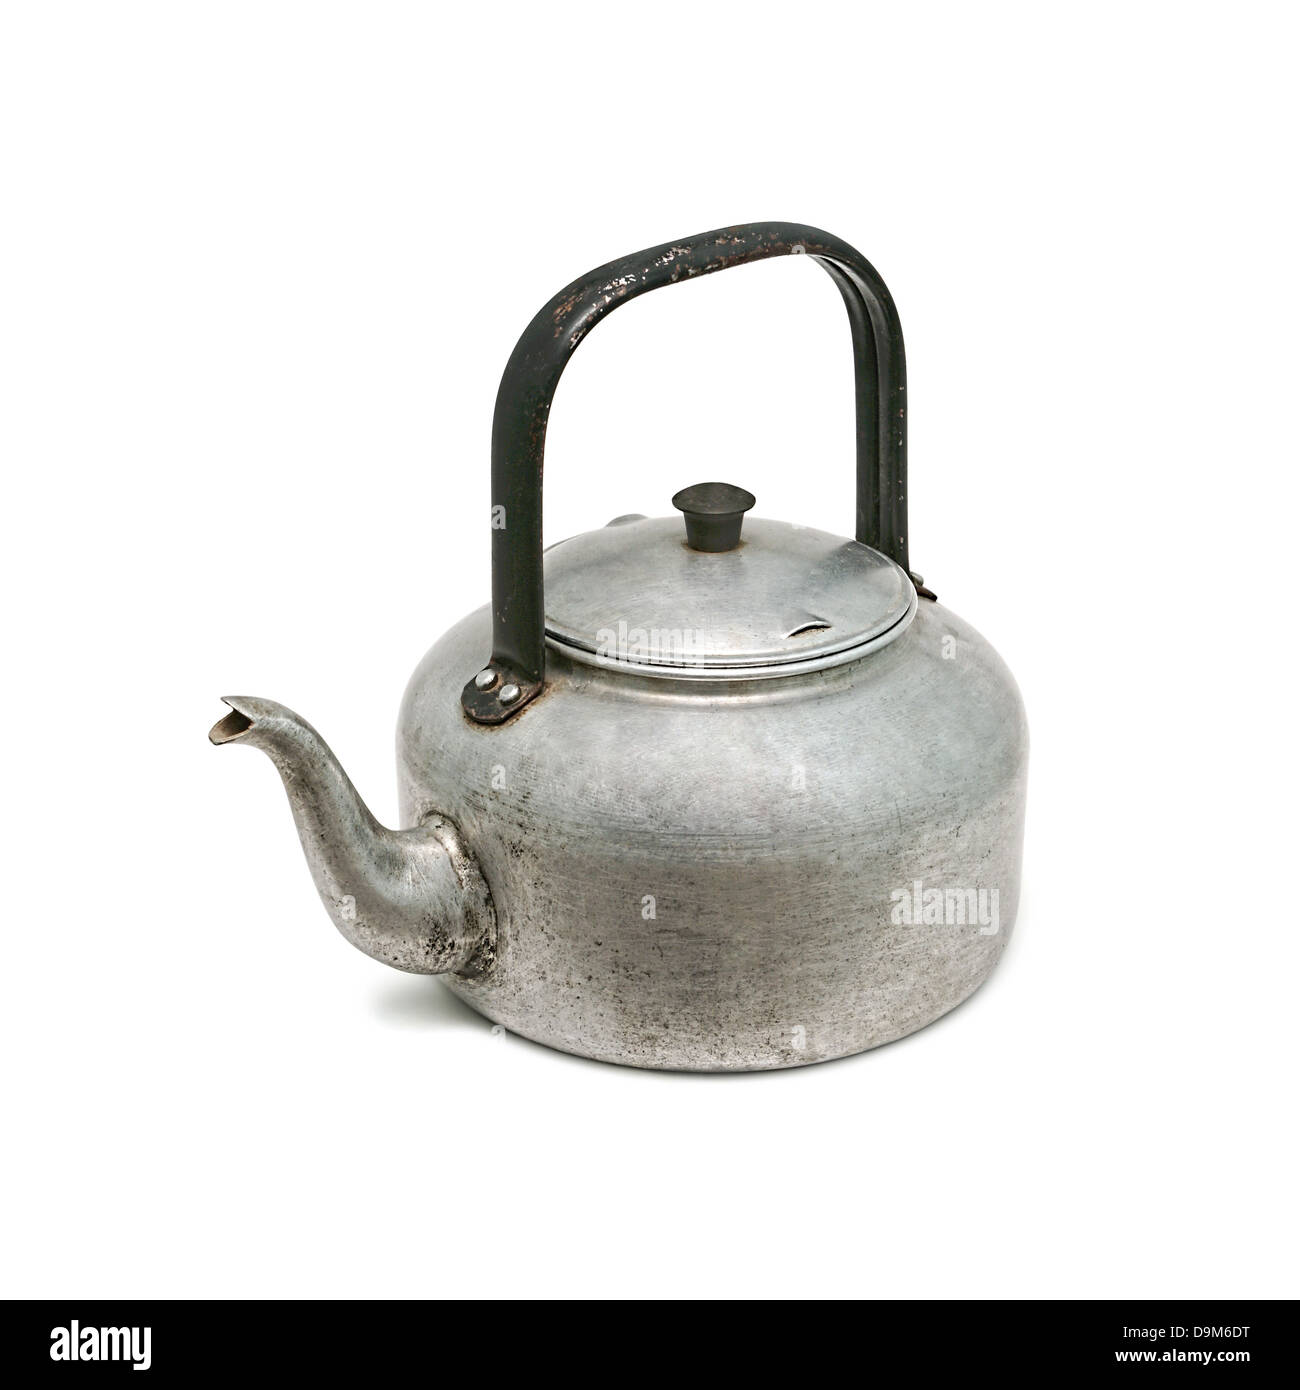 https://c8.alamy.com/comp/D9M6DT/old-metallic-kettle-with-scratched-texture-and-surface-on-white-background-D9M6DT.jpg